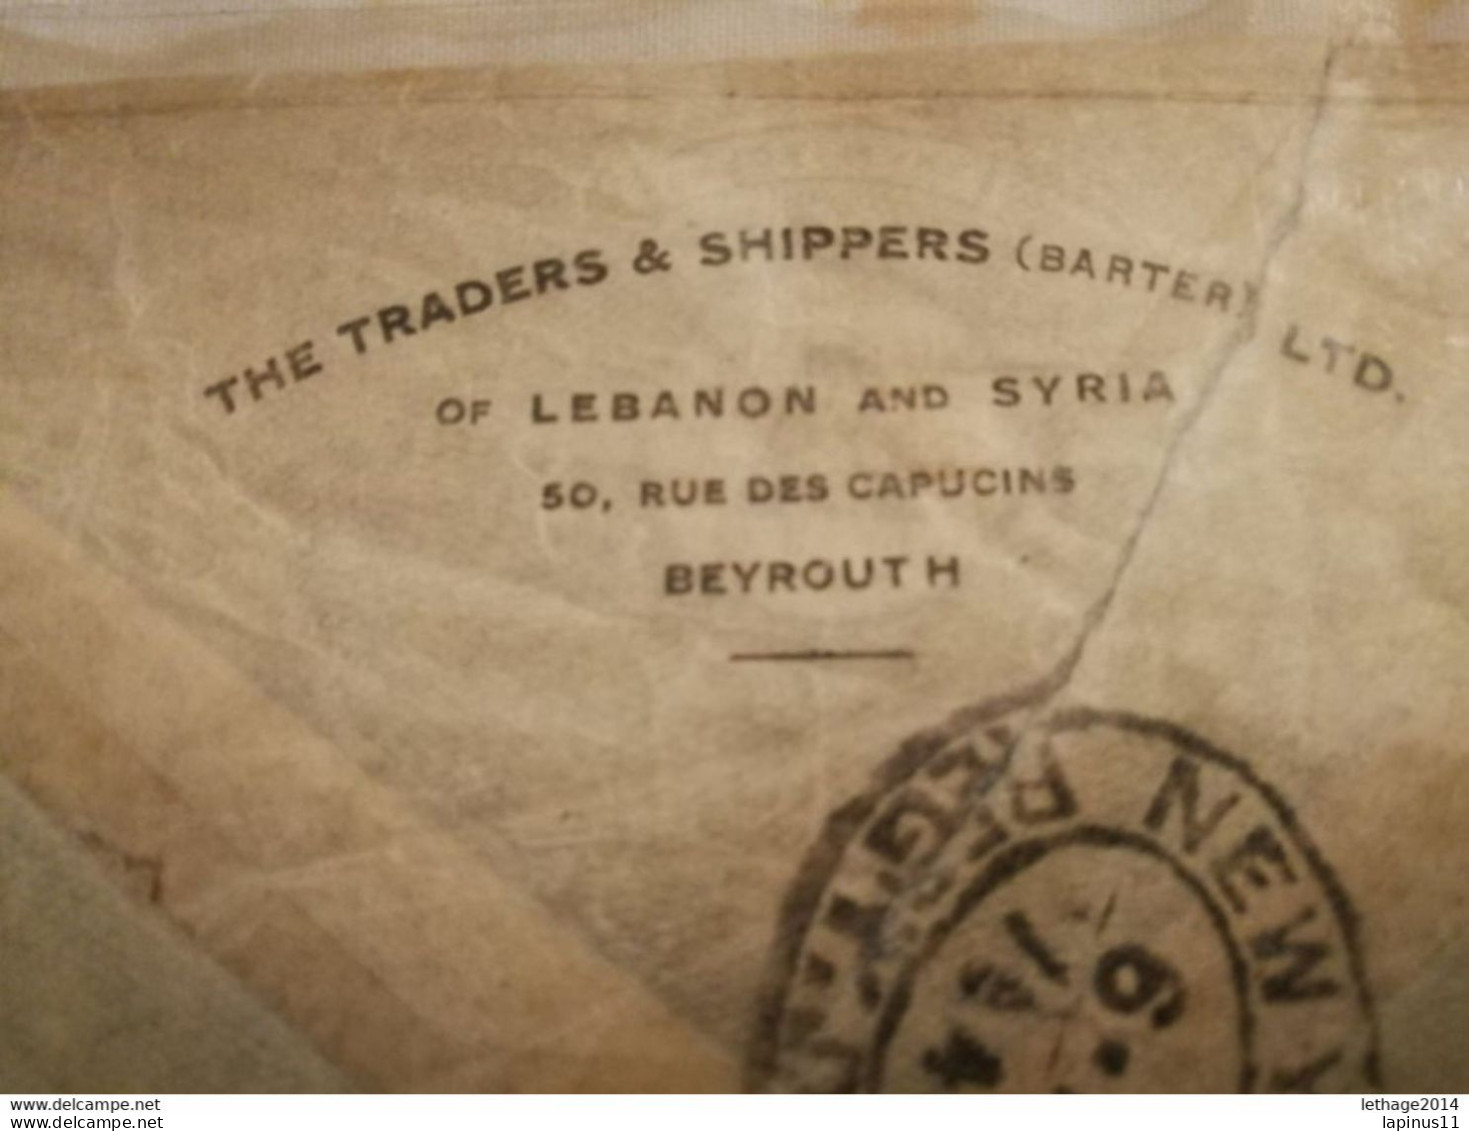 Liban ,Lebanon 1945 REGISTER MAIL BEYROUTH TO NEW YORK +ERROR OVERPRINTED CONTROLE - Liban